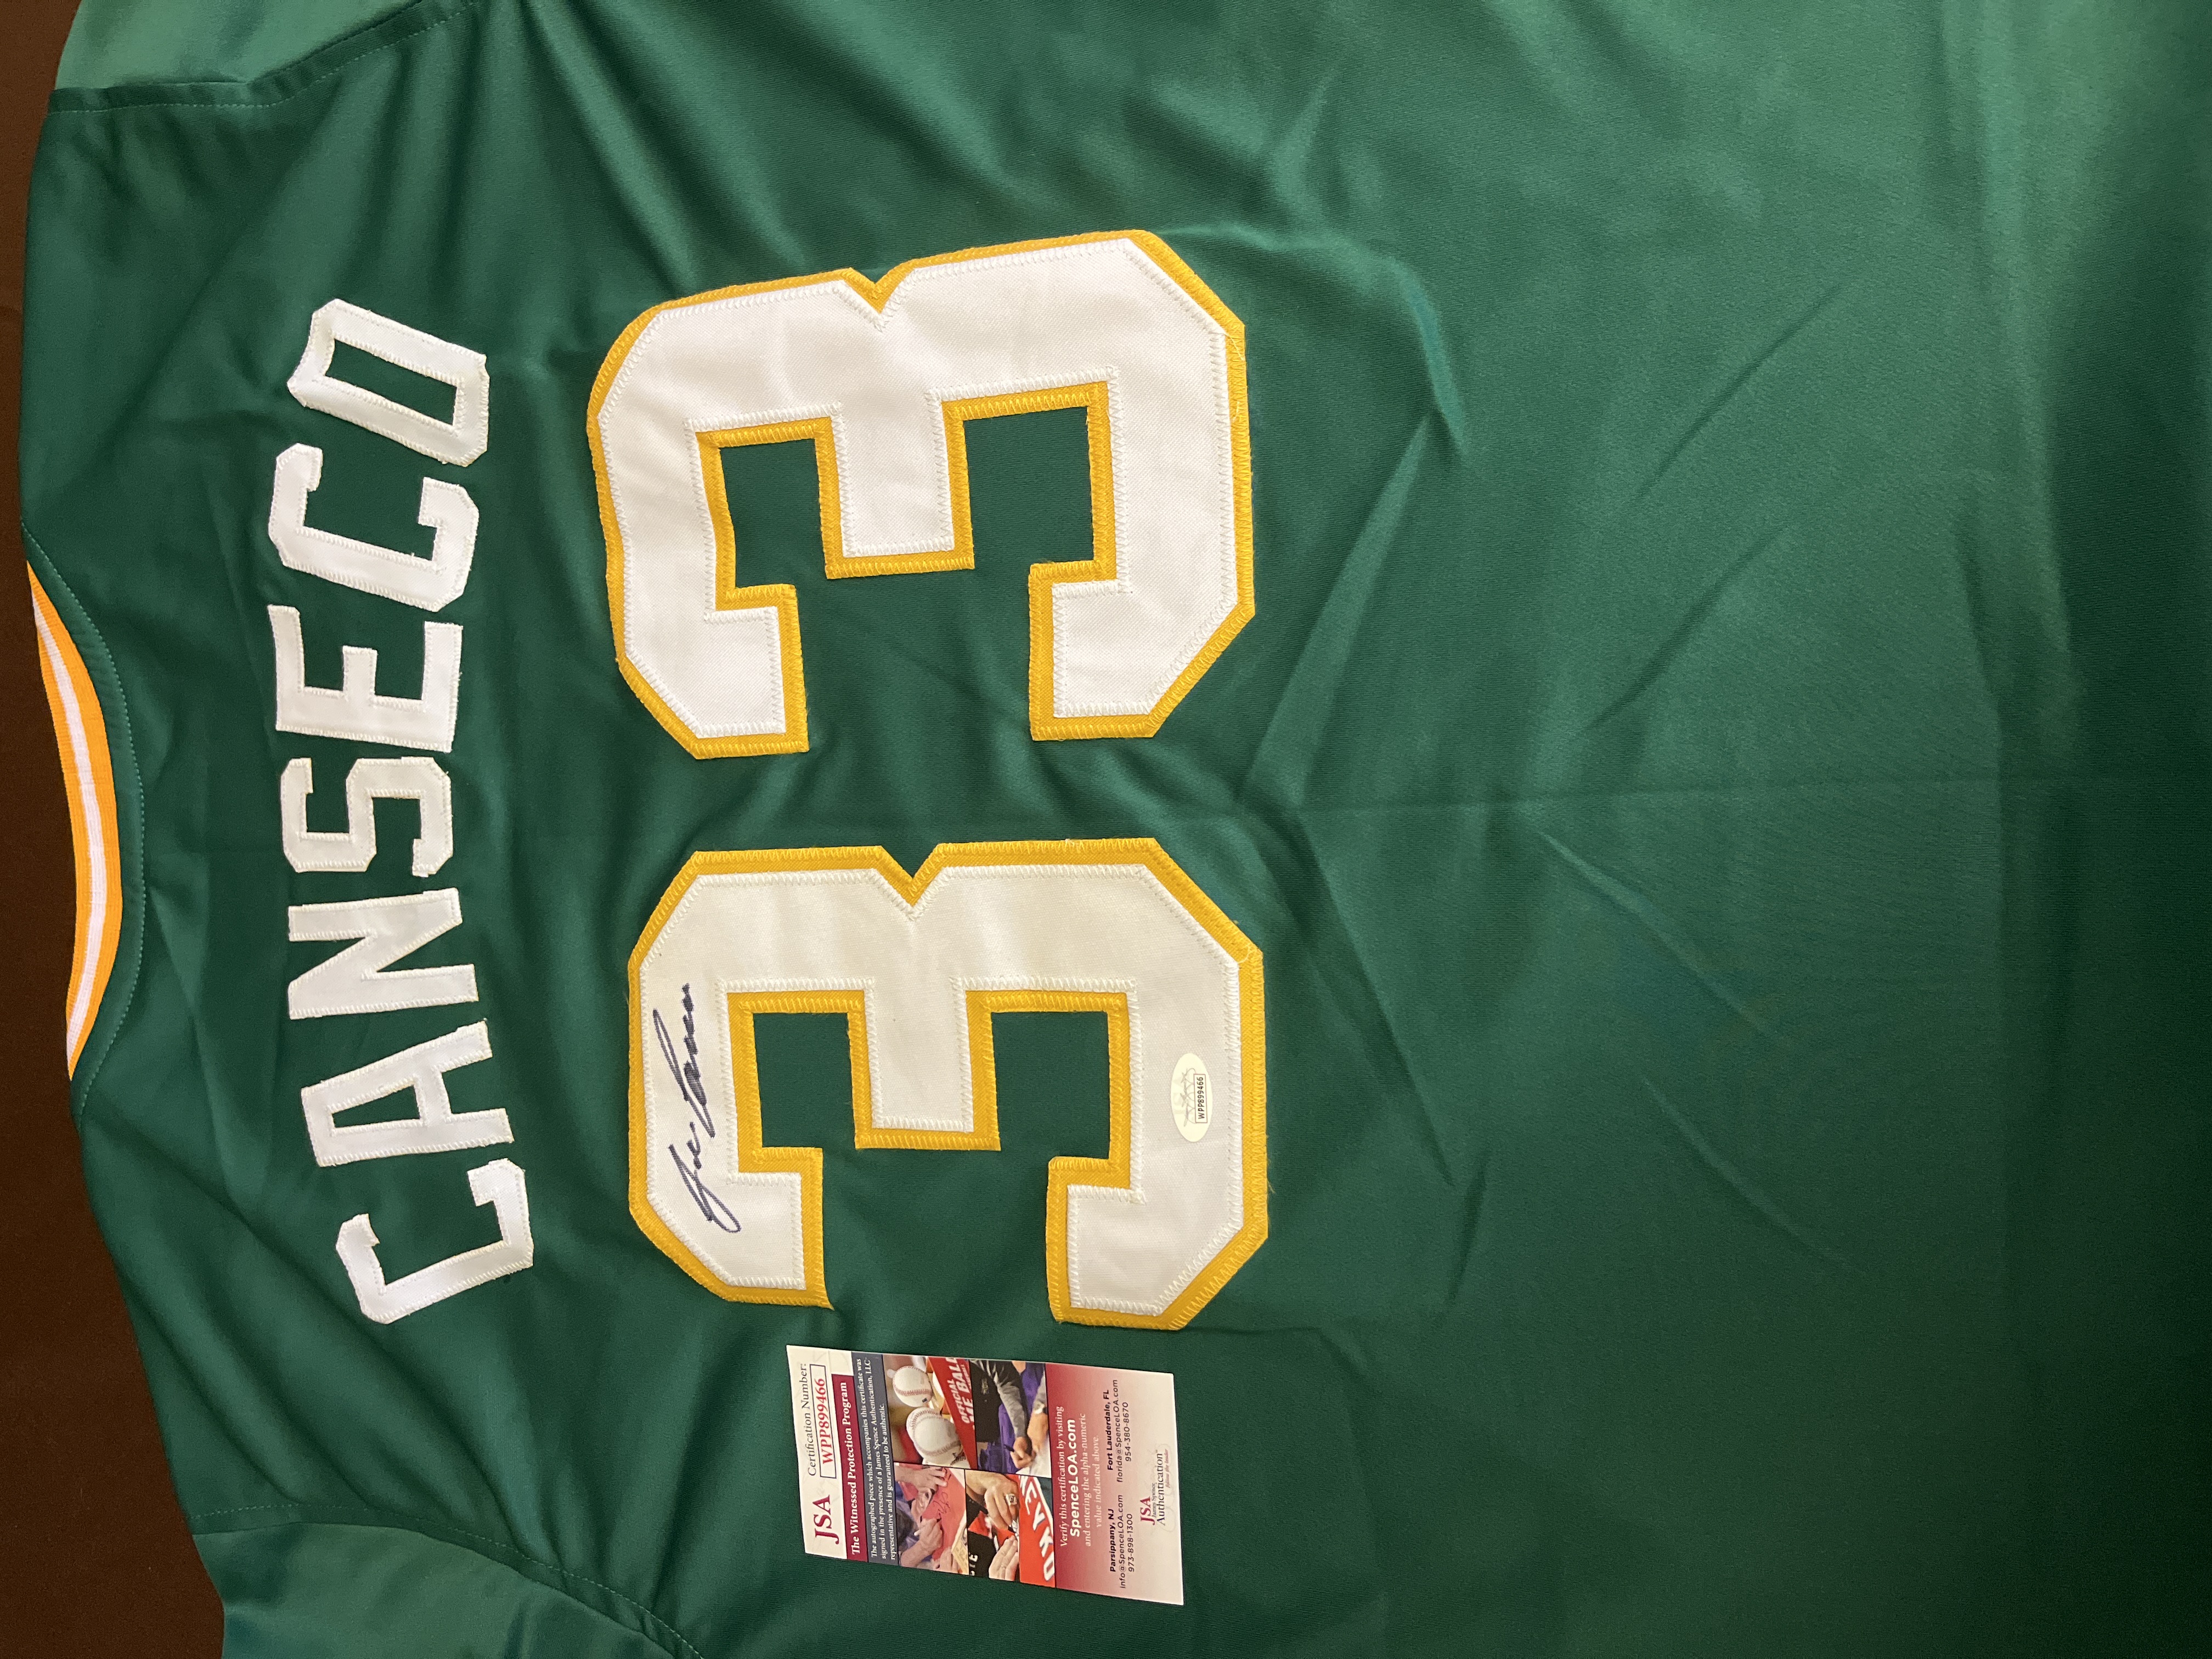 Secure Trade Club - Jose Canseco “Chemist” signed Oakland A's jersey